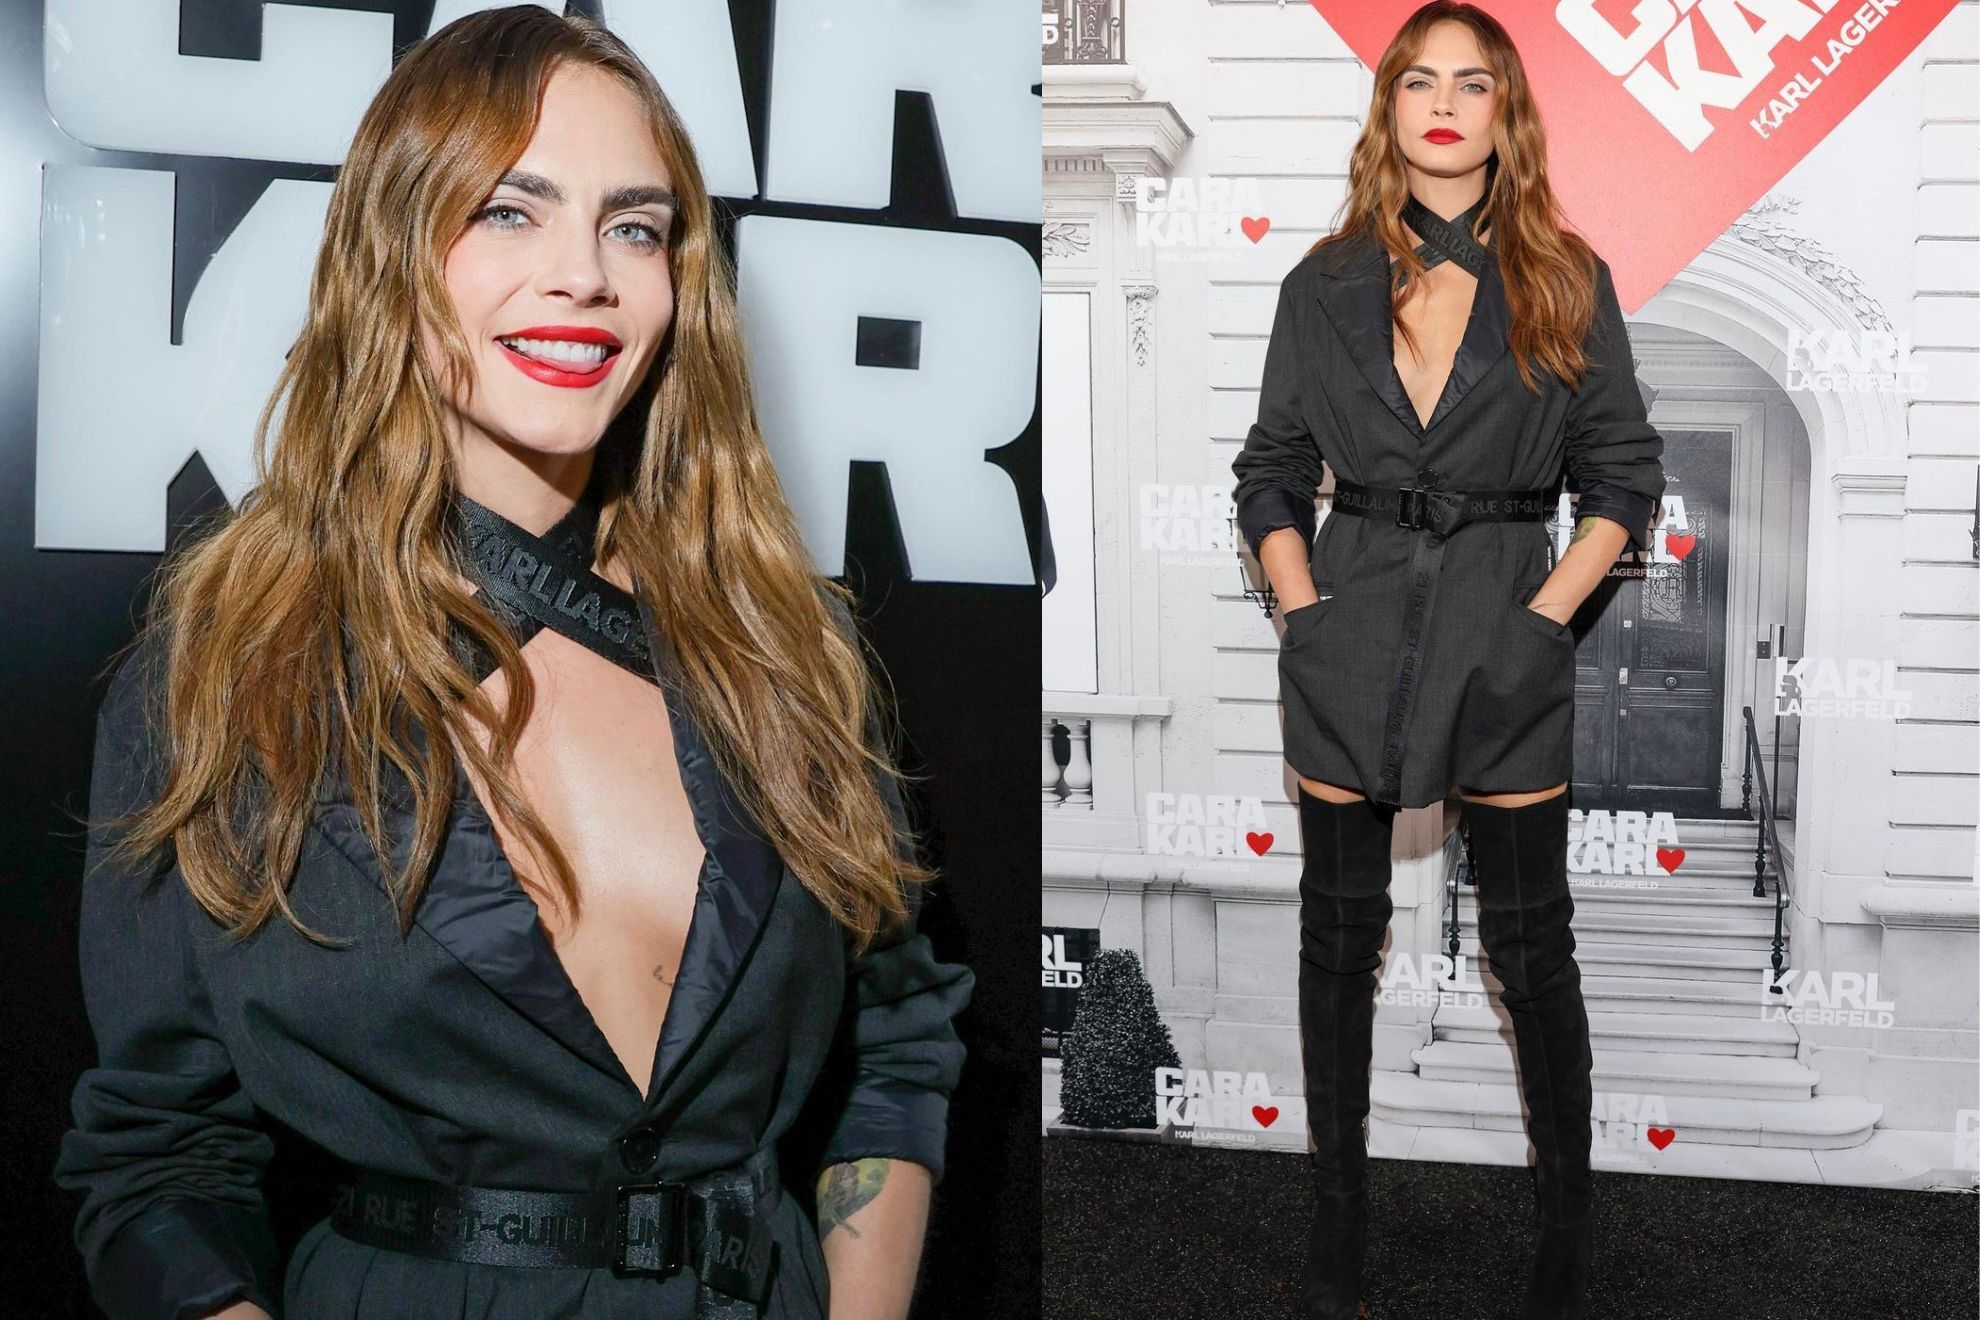 Cara Delevingne looked stunning in her return to a public event after the mental and physical health scare she allegedly had earlier this month. -@justjared